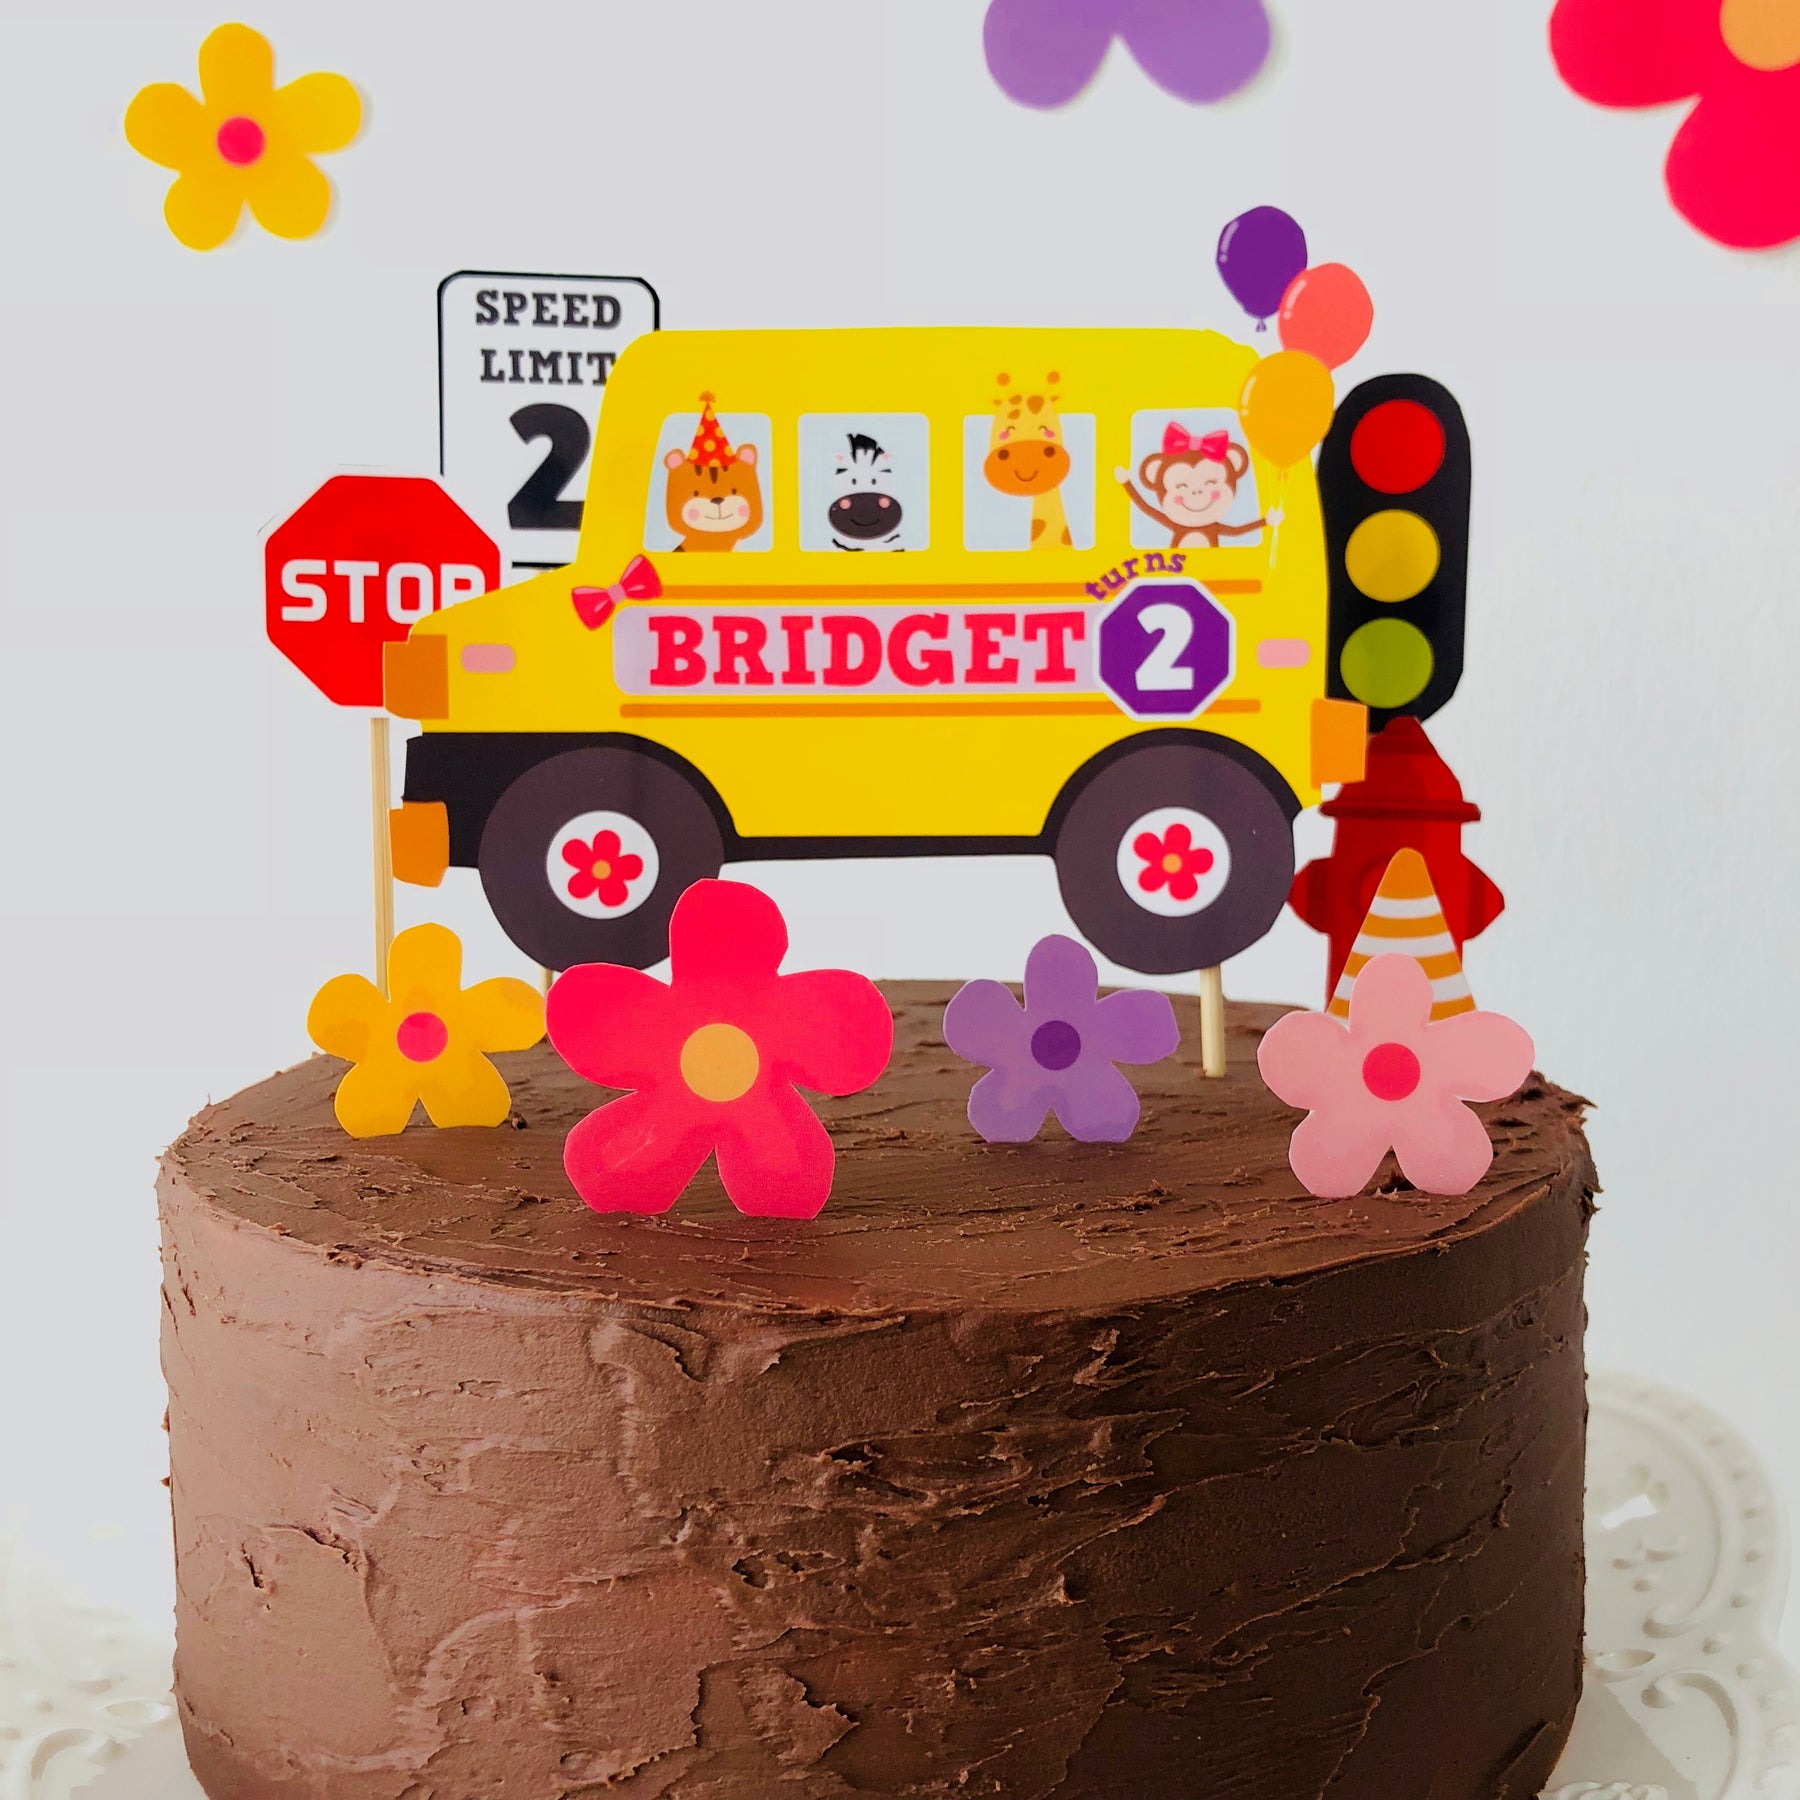 Bus　on　Girl　the　Pigsy　Wheels　–　Cake　Topper　Party　Printable　PigsyParty